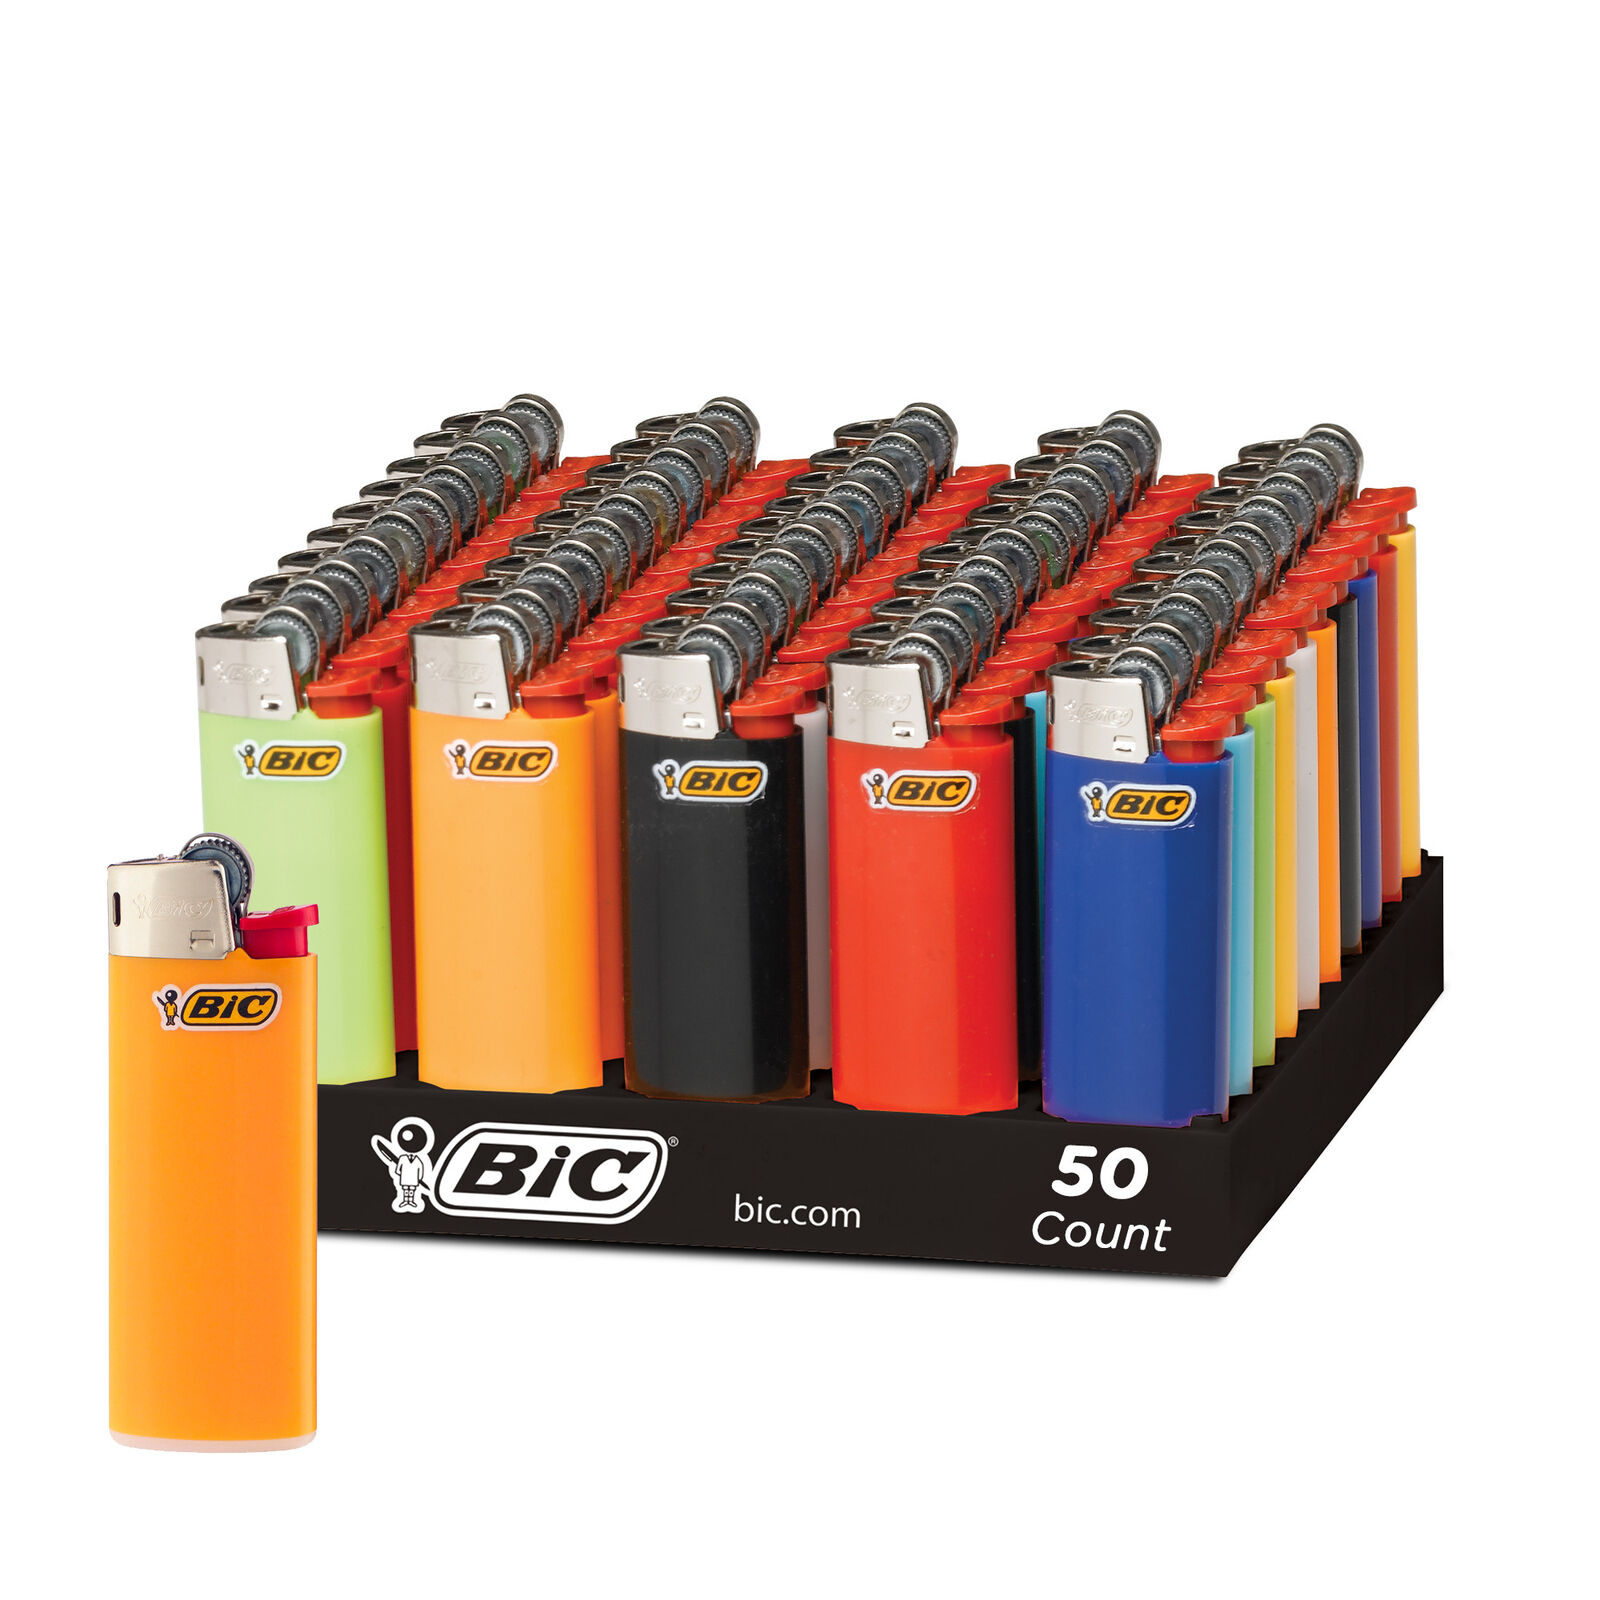 BIC Mini Pocket Lighter, Assorted Colors, 50-Count Tray, Safe and Reliable